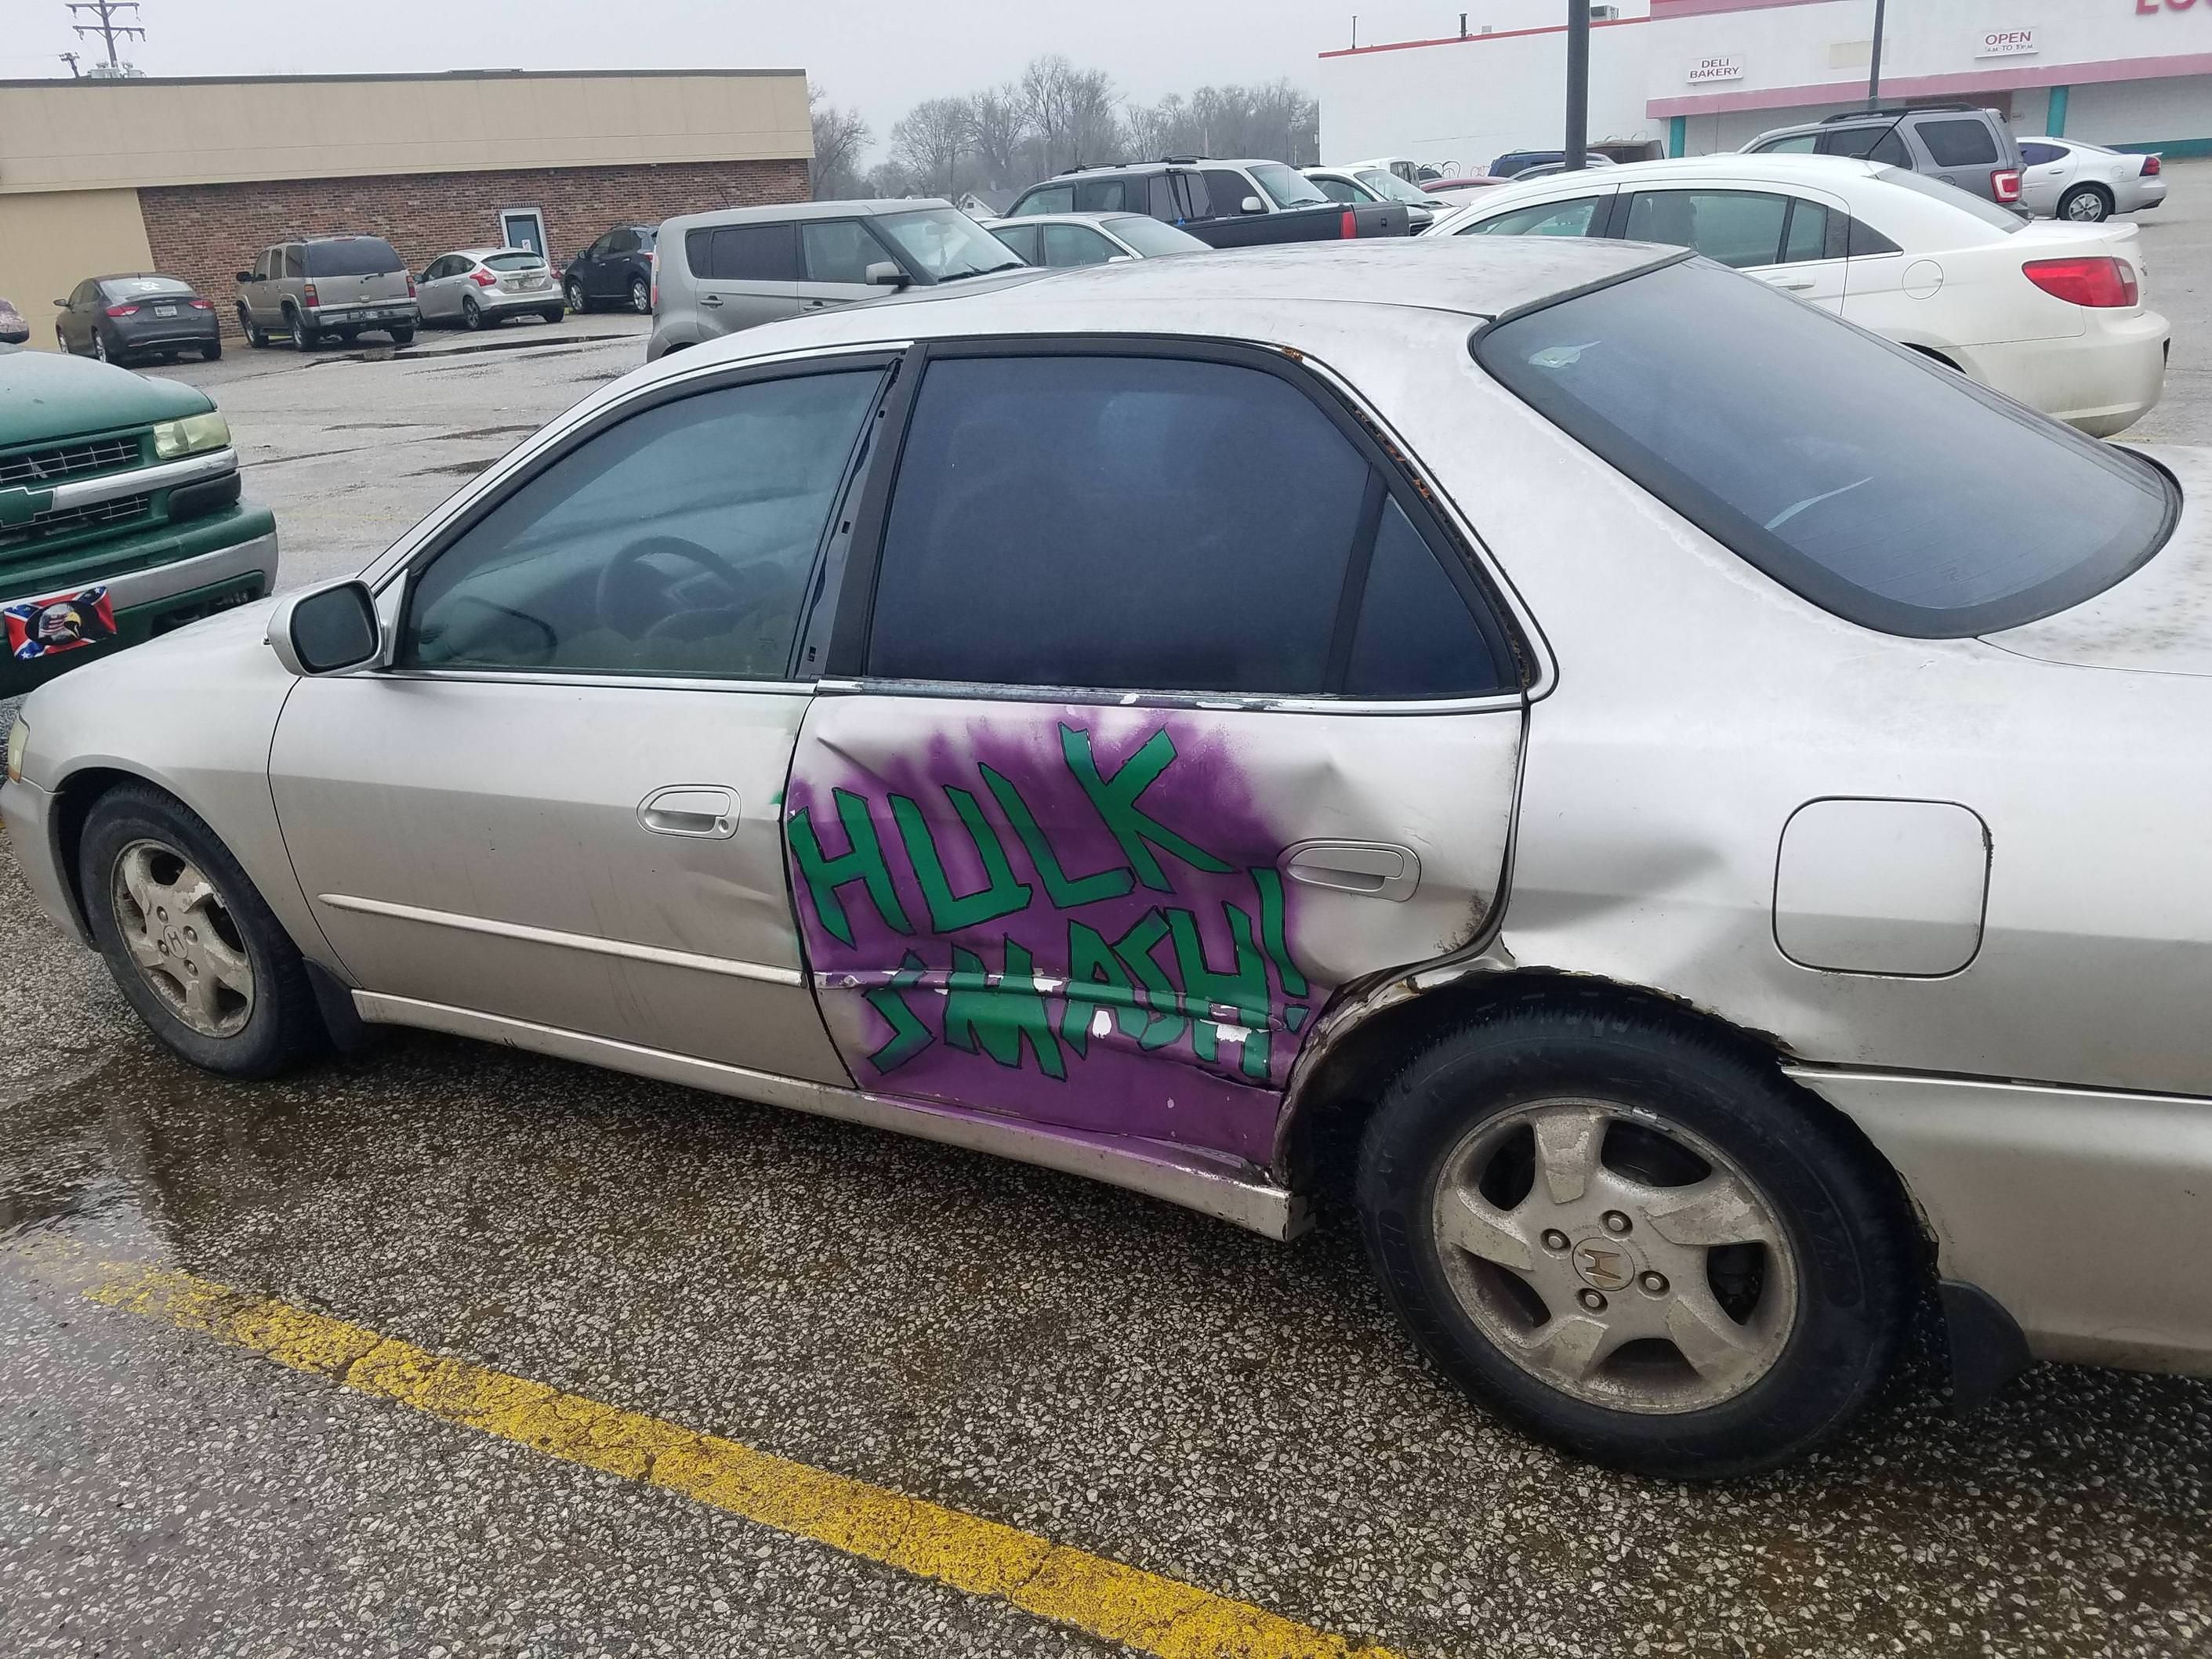 This person's awesome solution to covering up a large dent on their car.